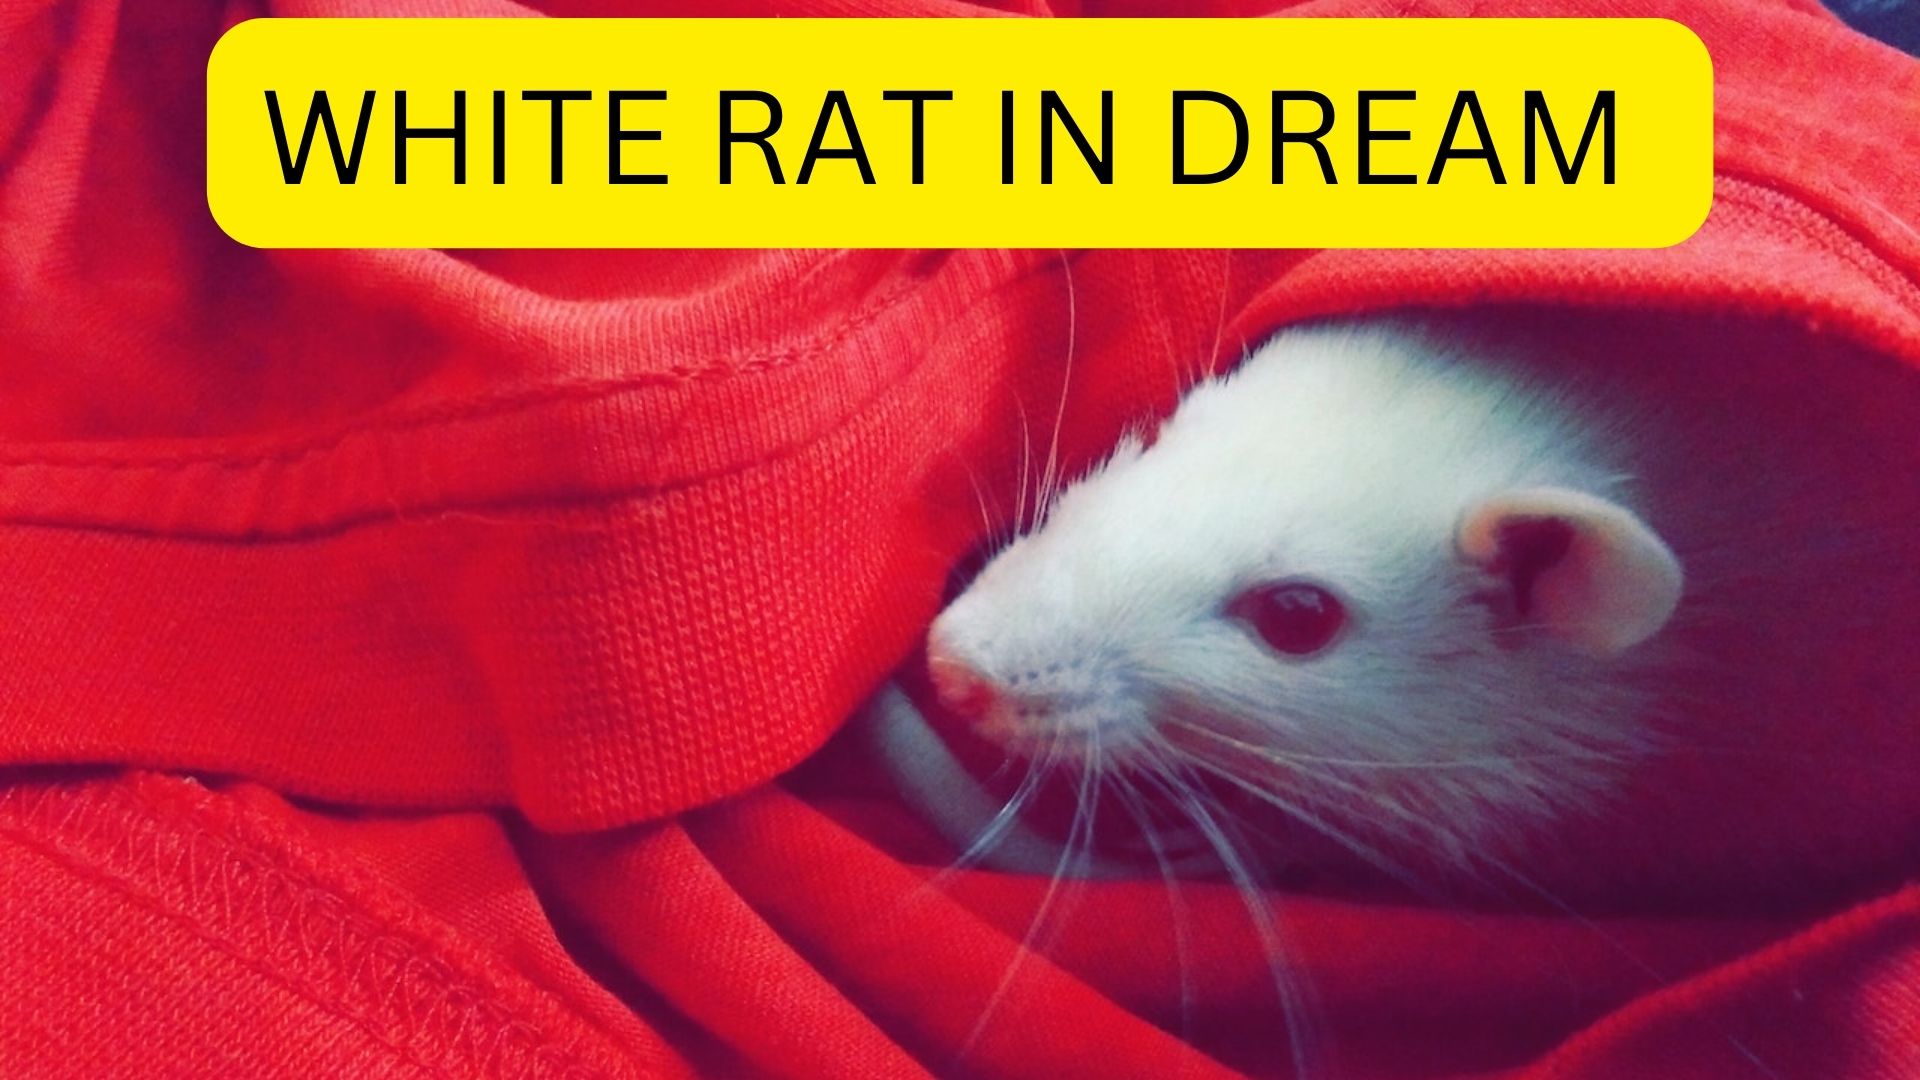 White Rat In Dream - Signifies Meanness, Betrayal